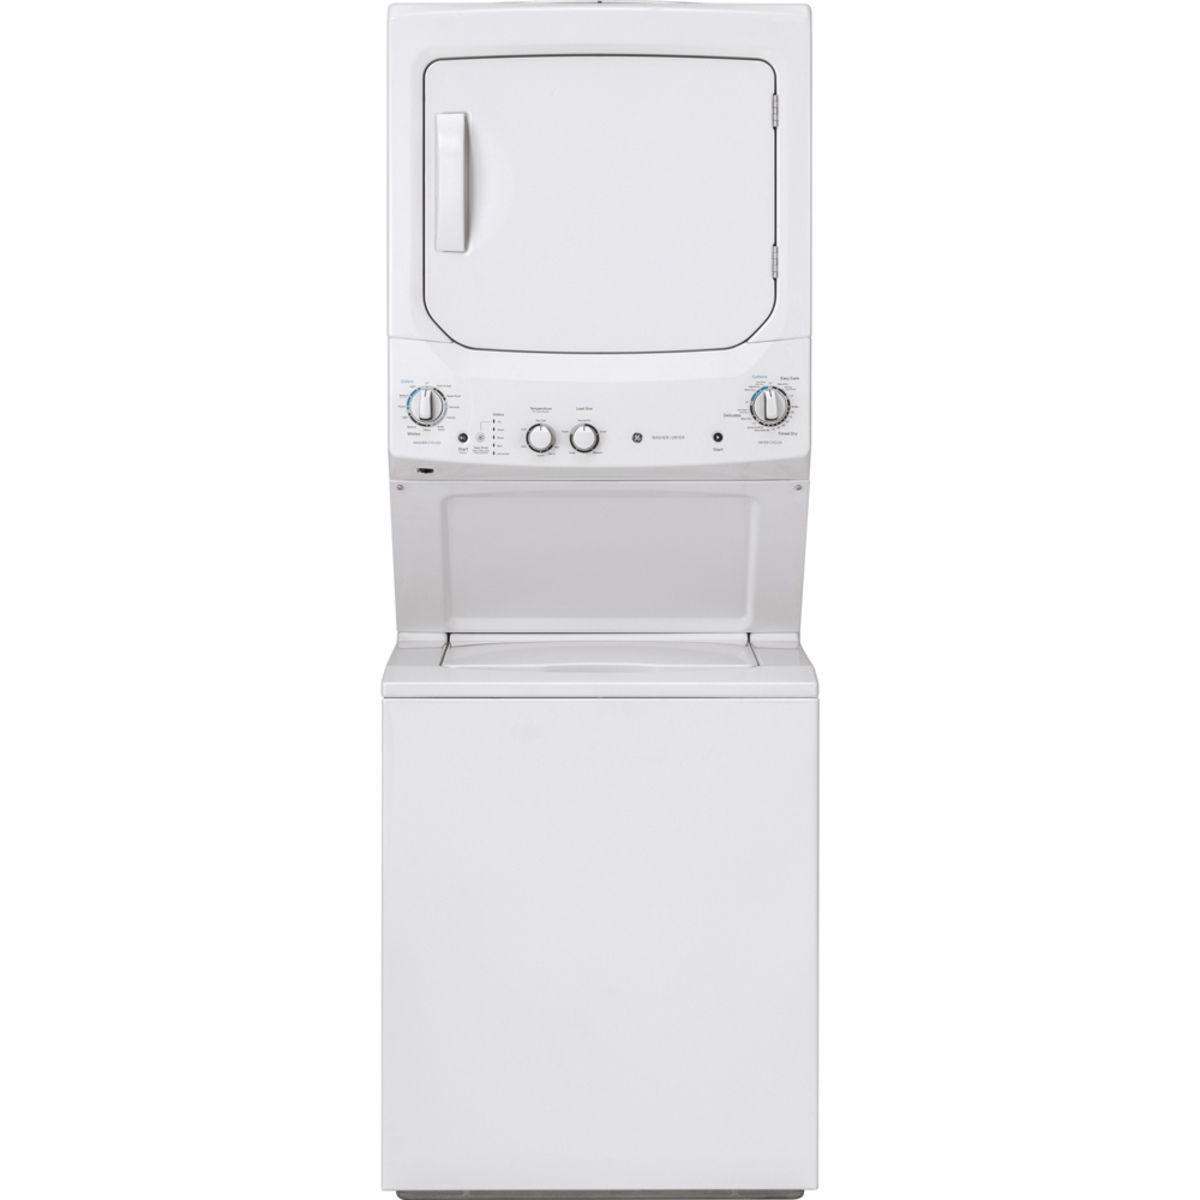 ge washer/dryer combo how to use